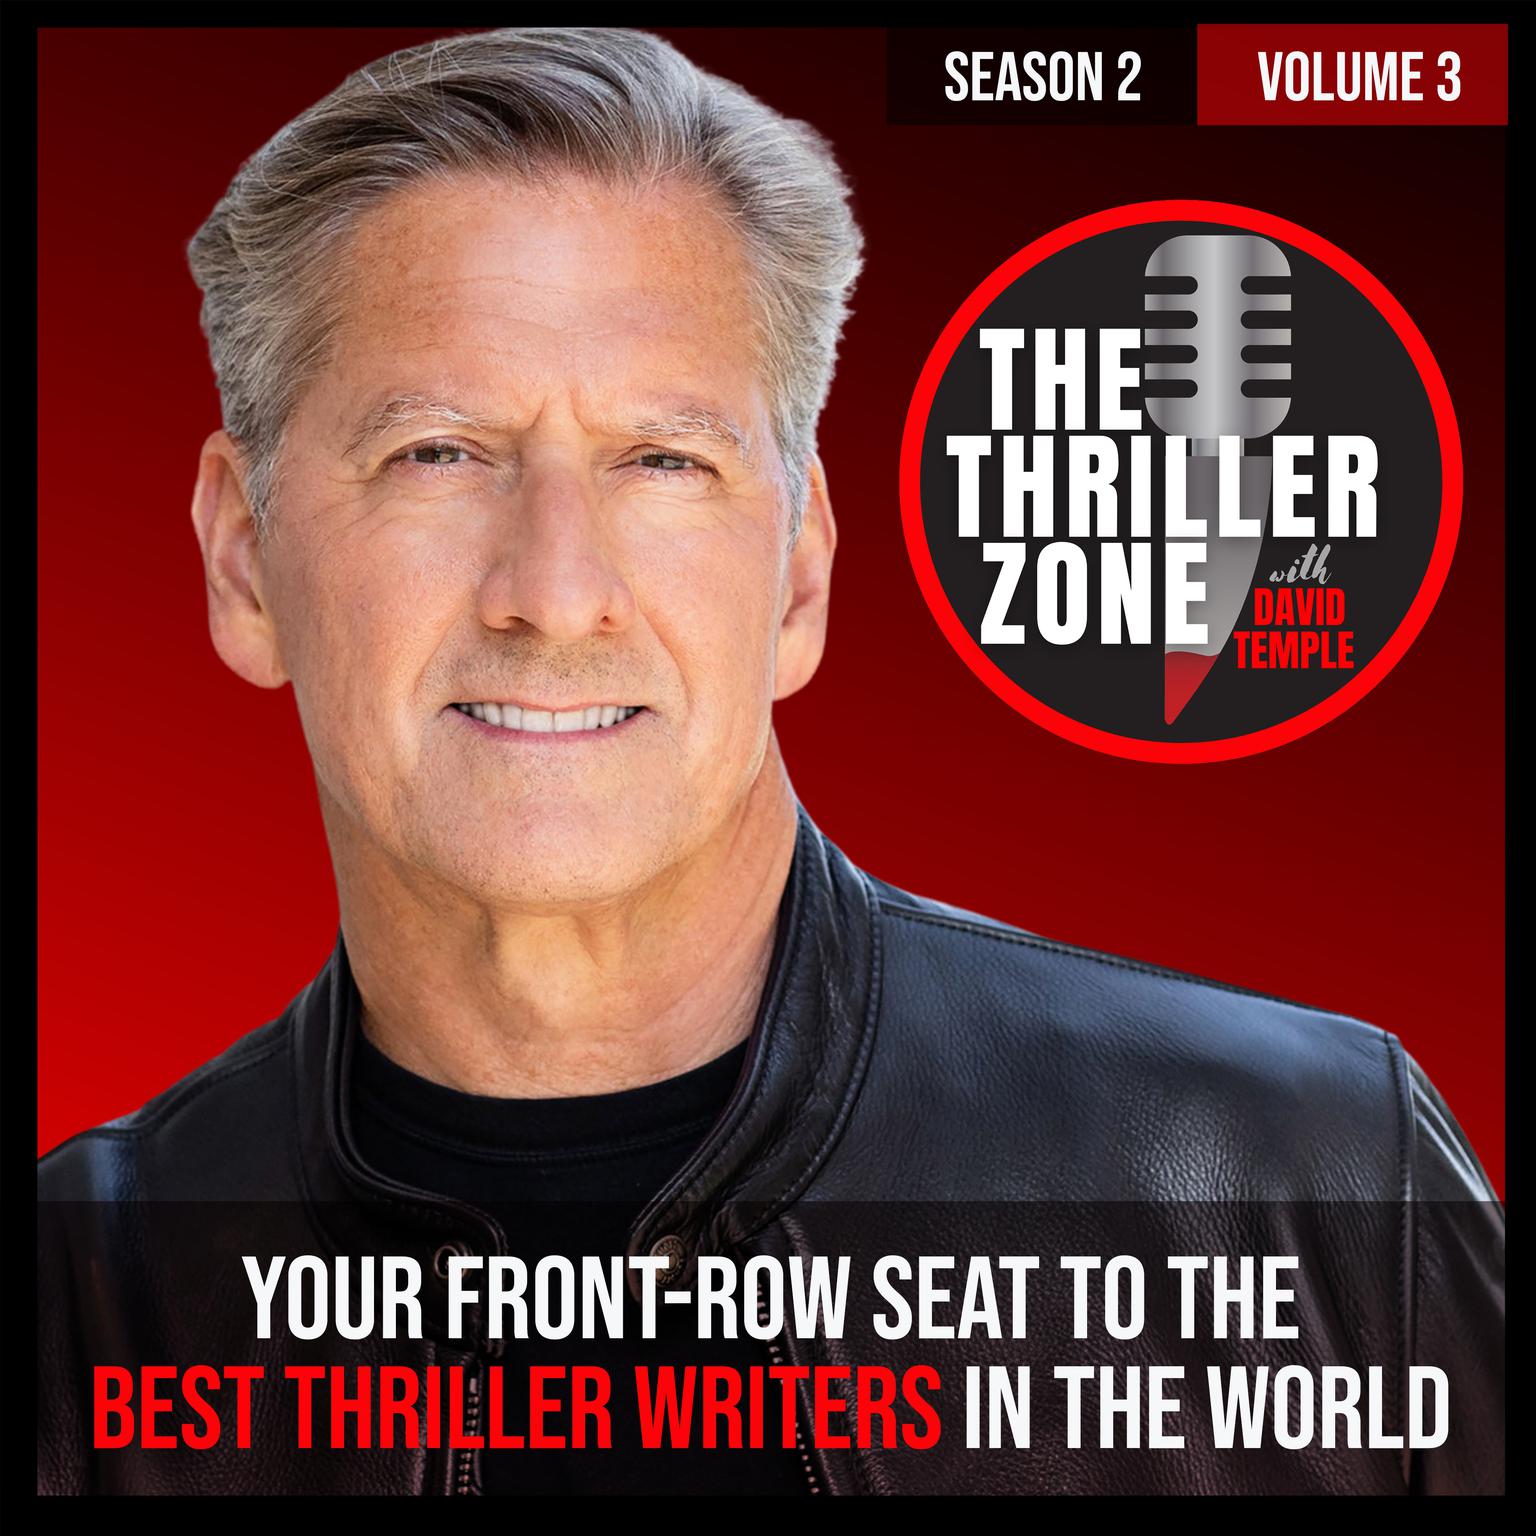 The Thriller Zone Podcast (TheThrillerZone.com): Season 2, Vol. 3: Your Front-Row Seat to the Best Thriller Writers in the World  Audiobook, by David Temple